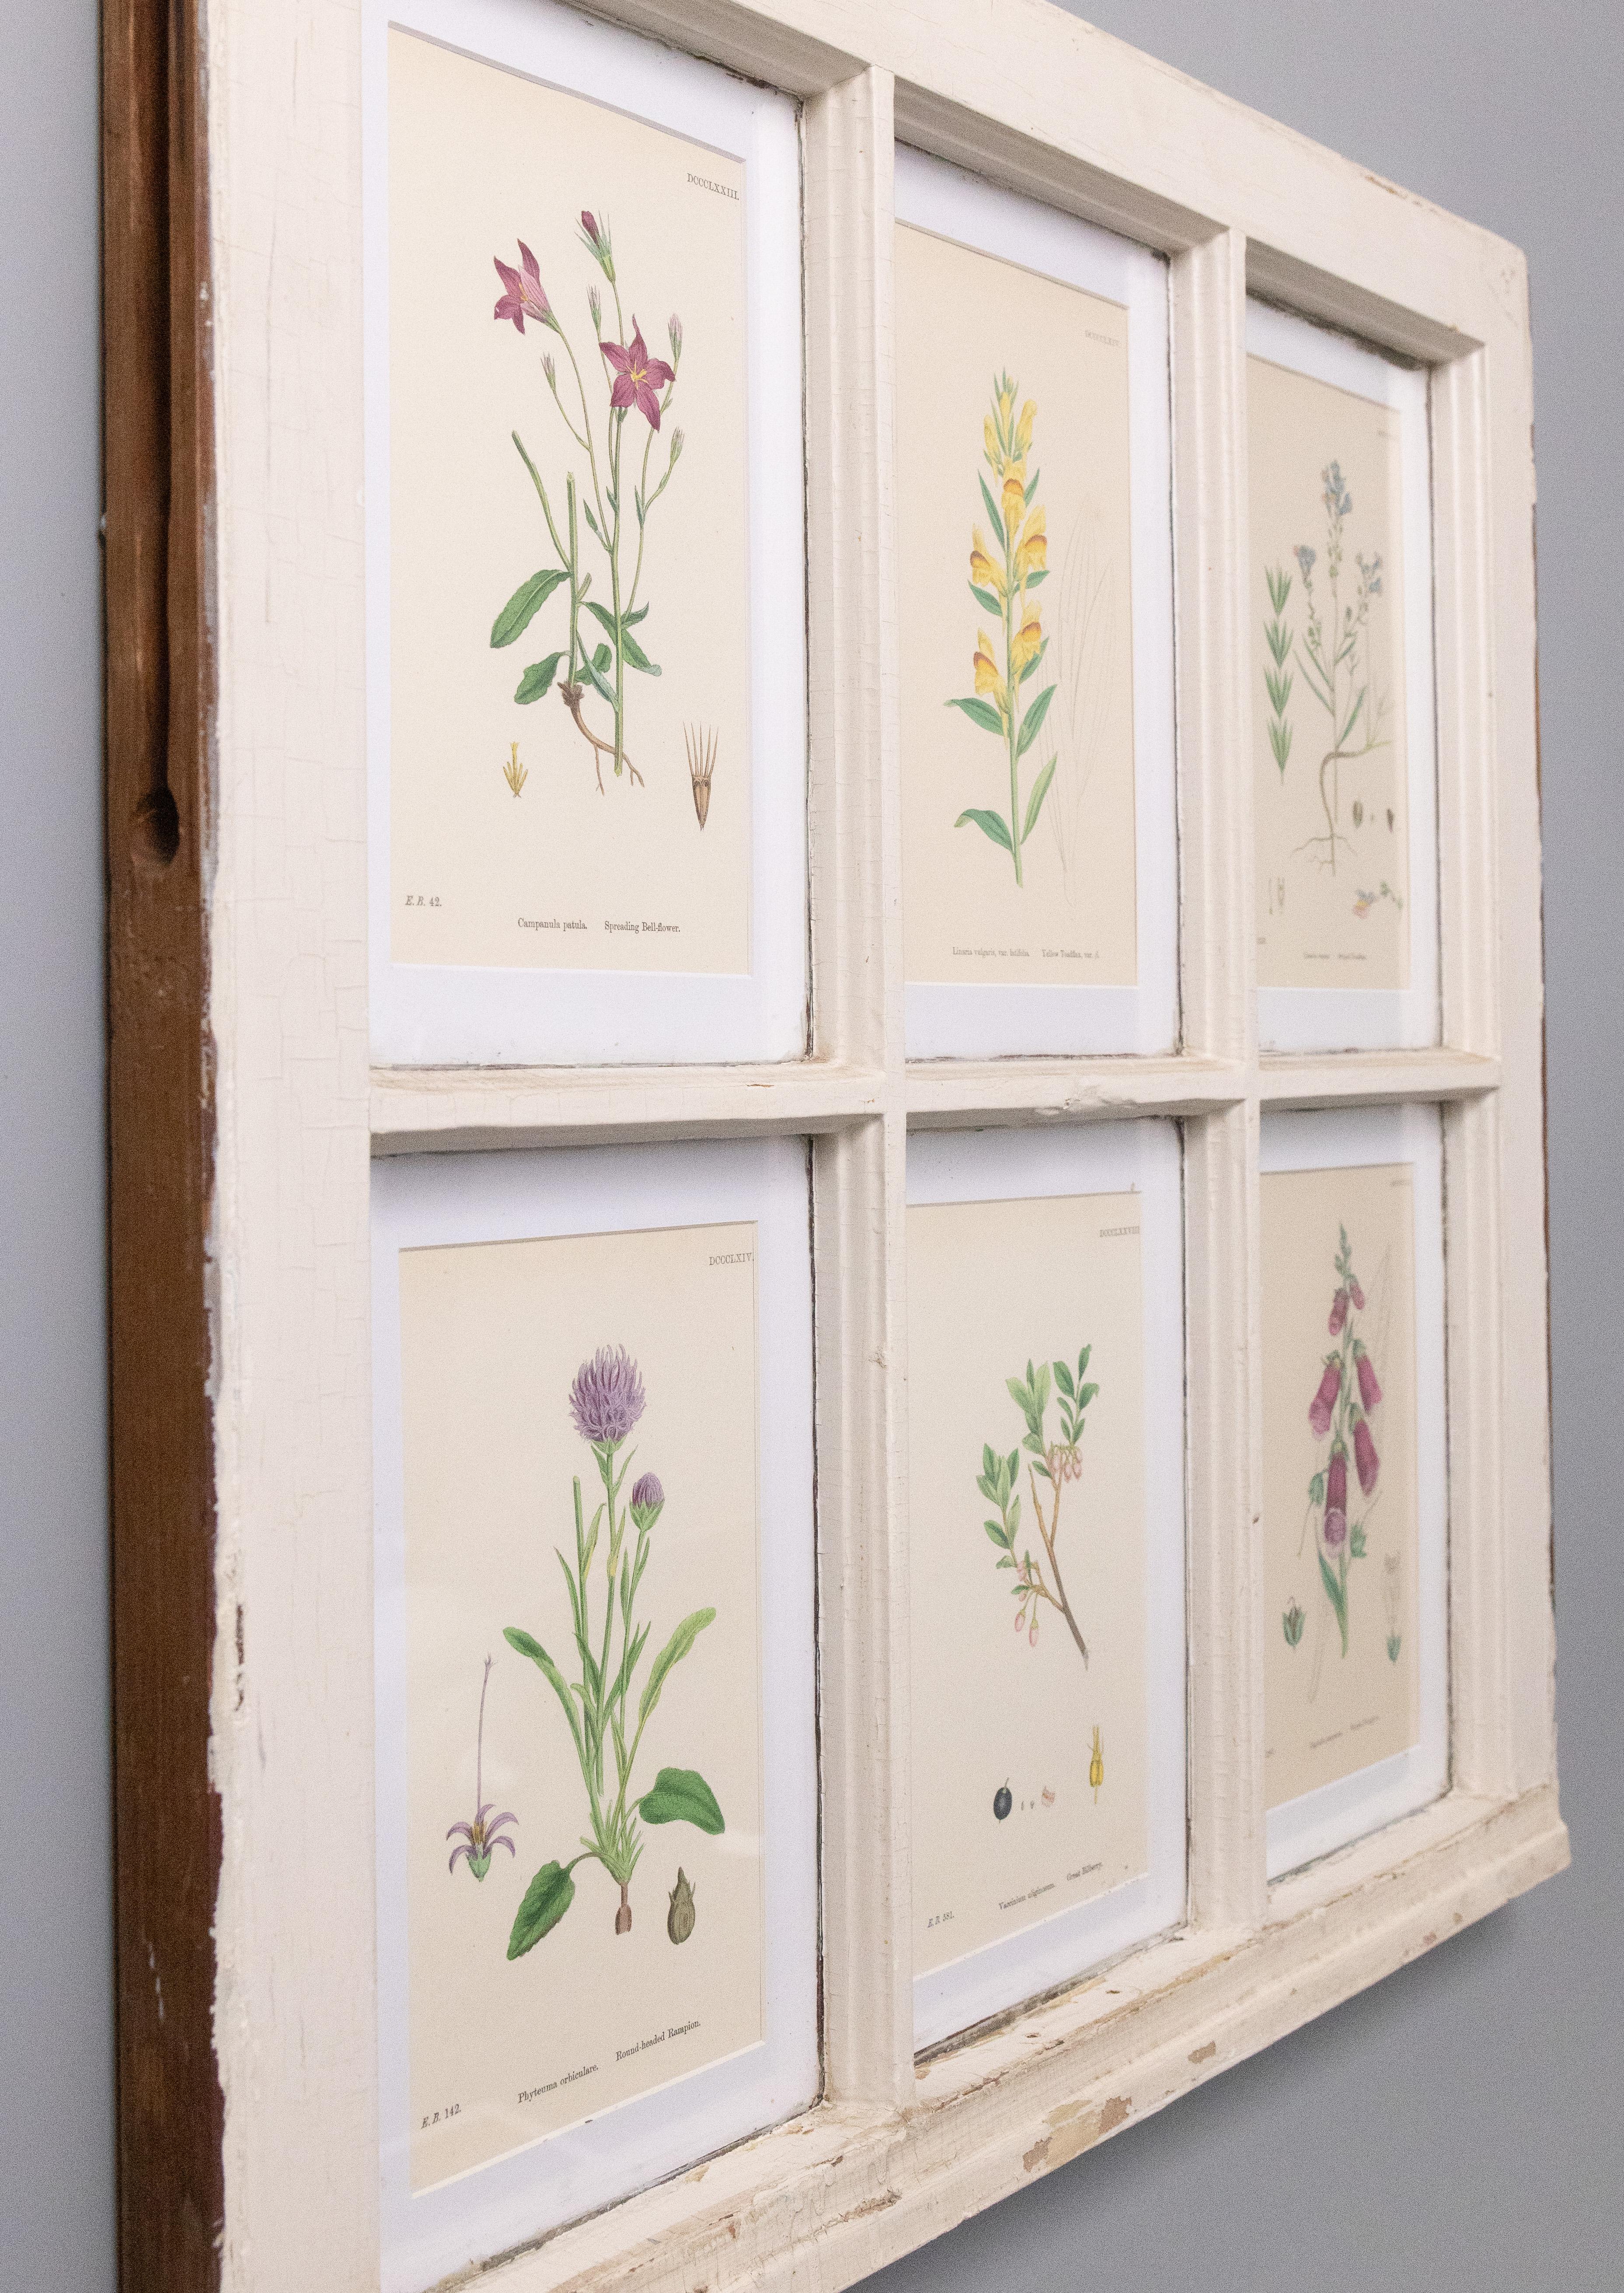 Marvelous old antique top window sashes, salvaged from an arts and crafts home, built in the early 1920's. They retain the original wavy glass. Mounted within are six 19th century custom matted botanical engravings 